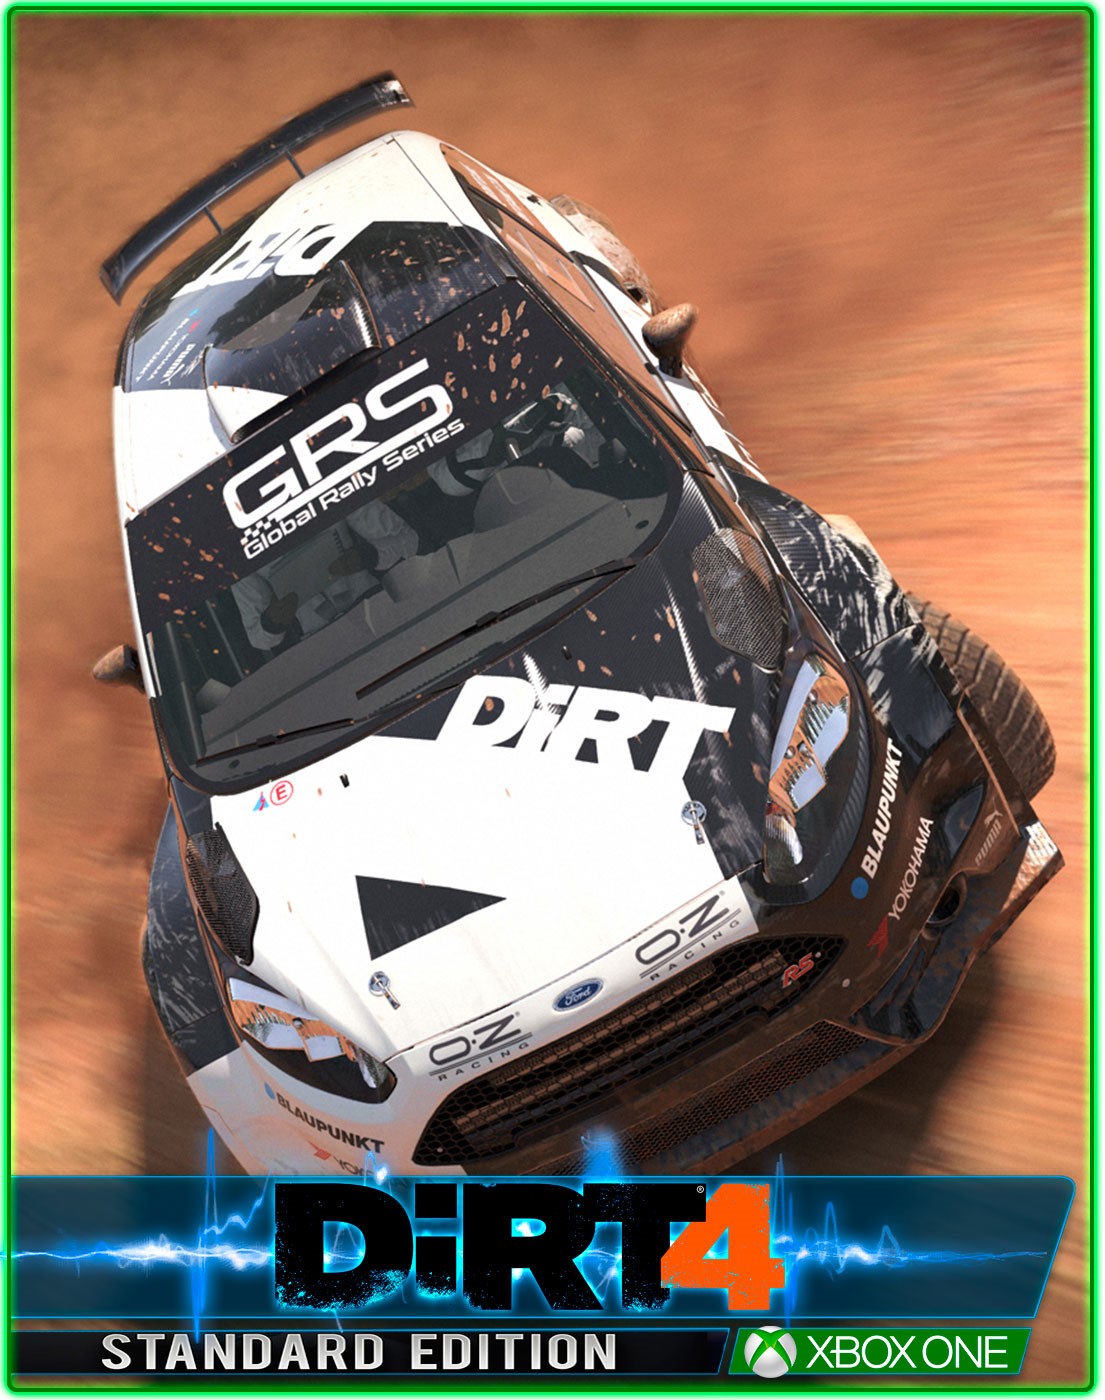 DIRT 4+Burnout Paradise Remastered XBOX ONE